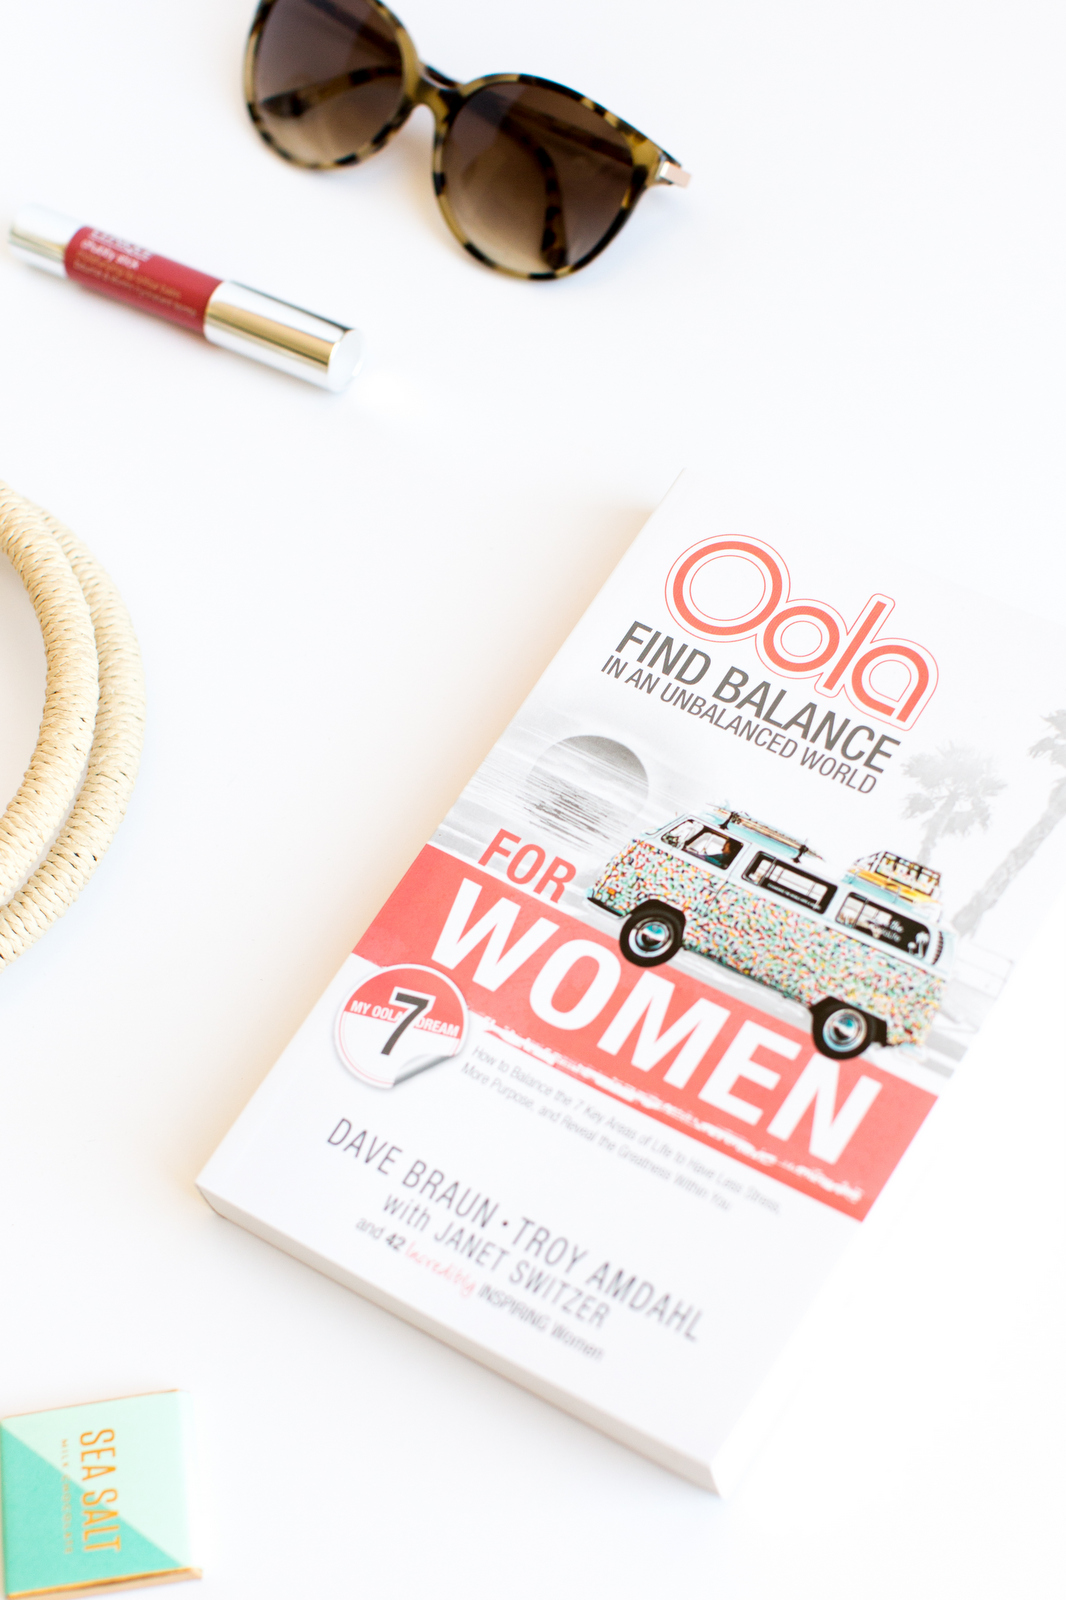 oola for women book 